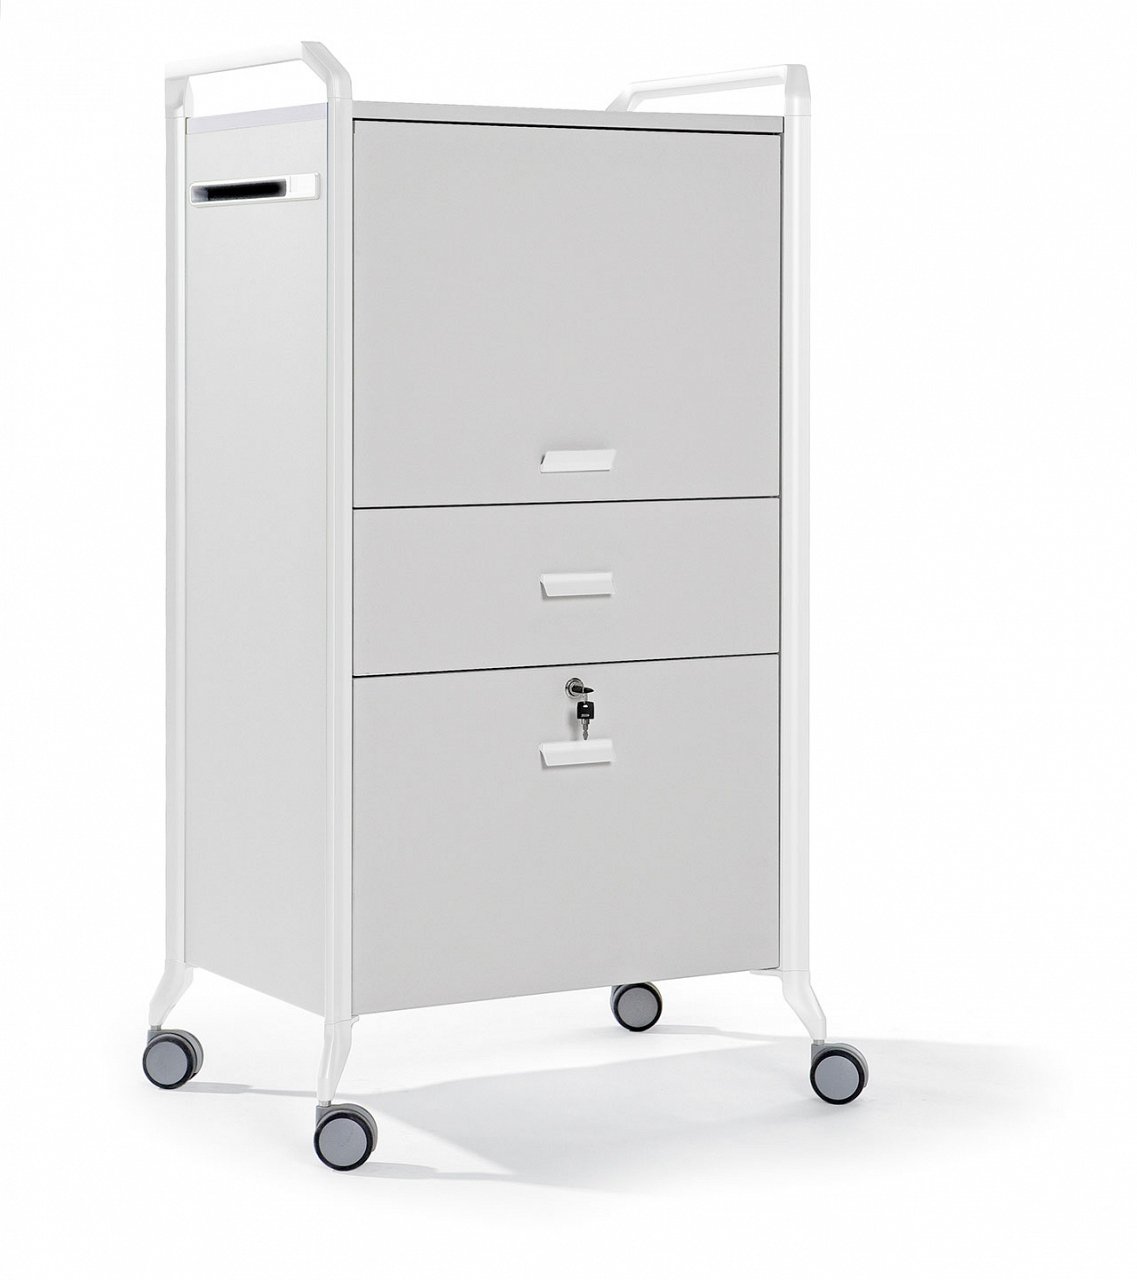 On Time Storage cabinet from Actiu